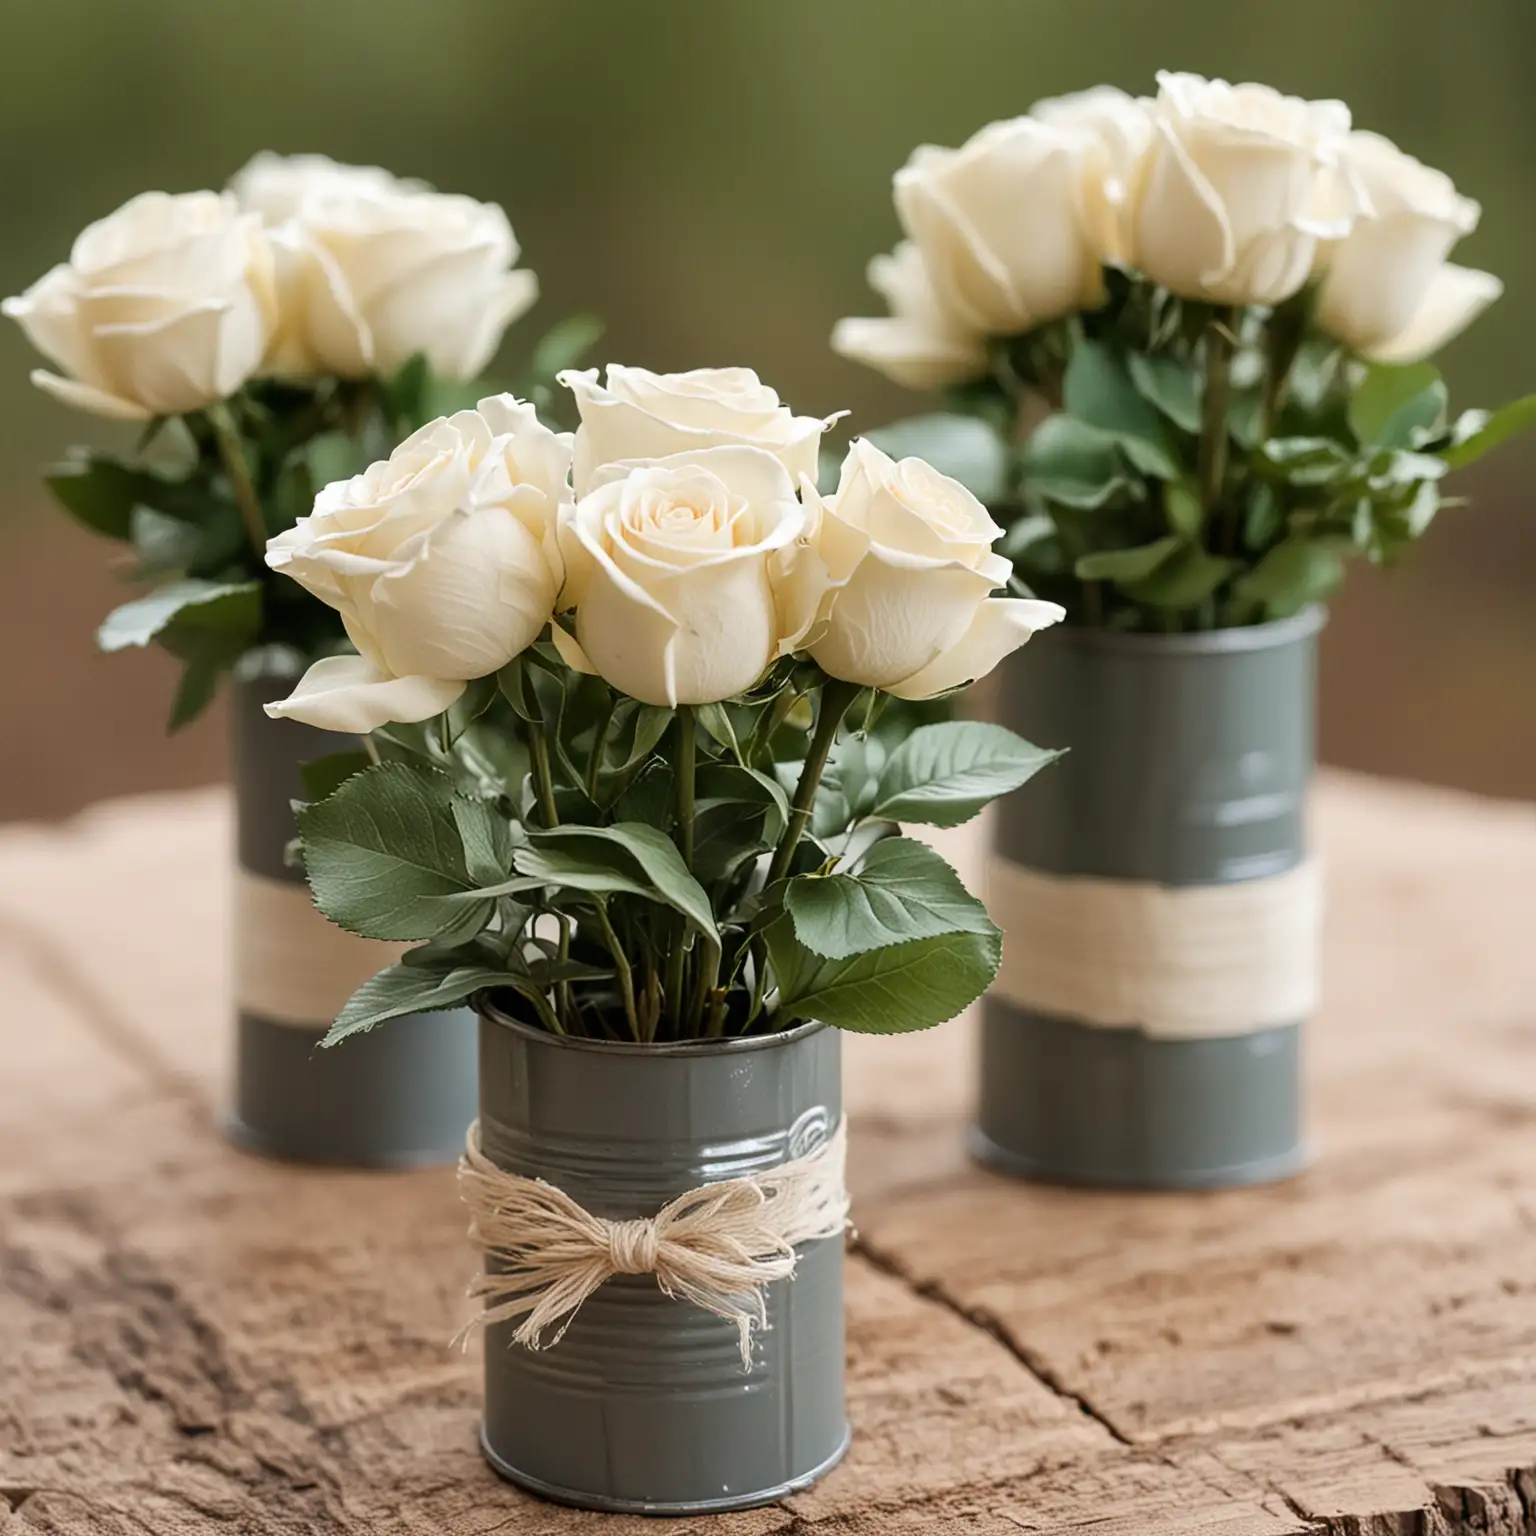 simple rustic wedding centerpieces with tin cans painted woodland colors holding a small ivory rose bouquet with greenery